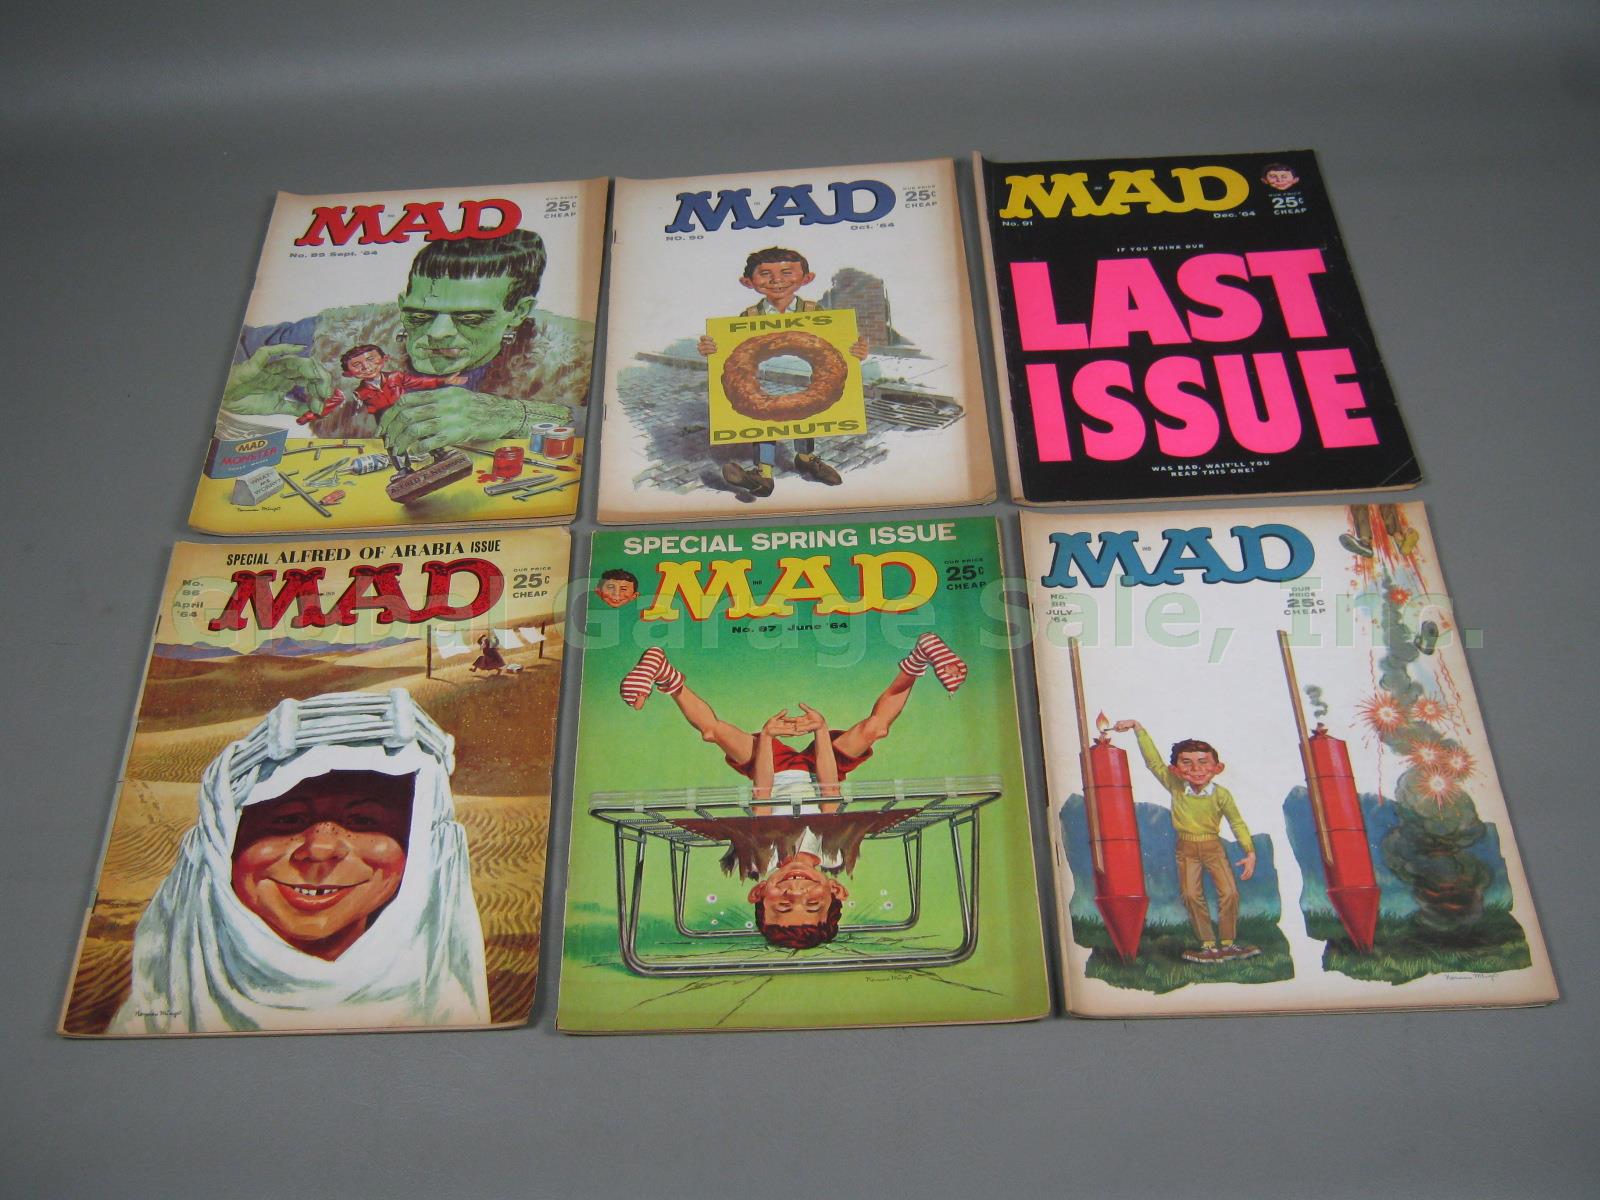 Vtg 1964-1971 Mad Magazine Lot 56 Issues #86-145 Almost Full Run Only 5 Missing! 1